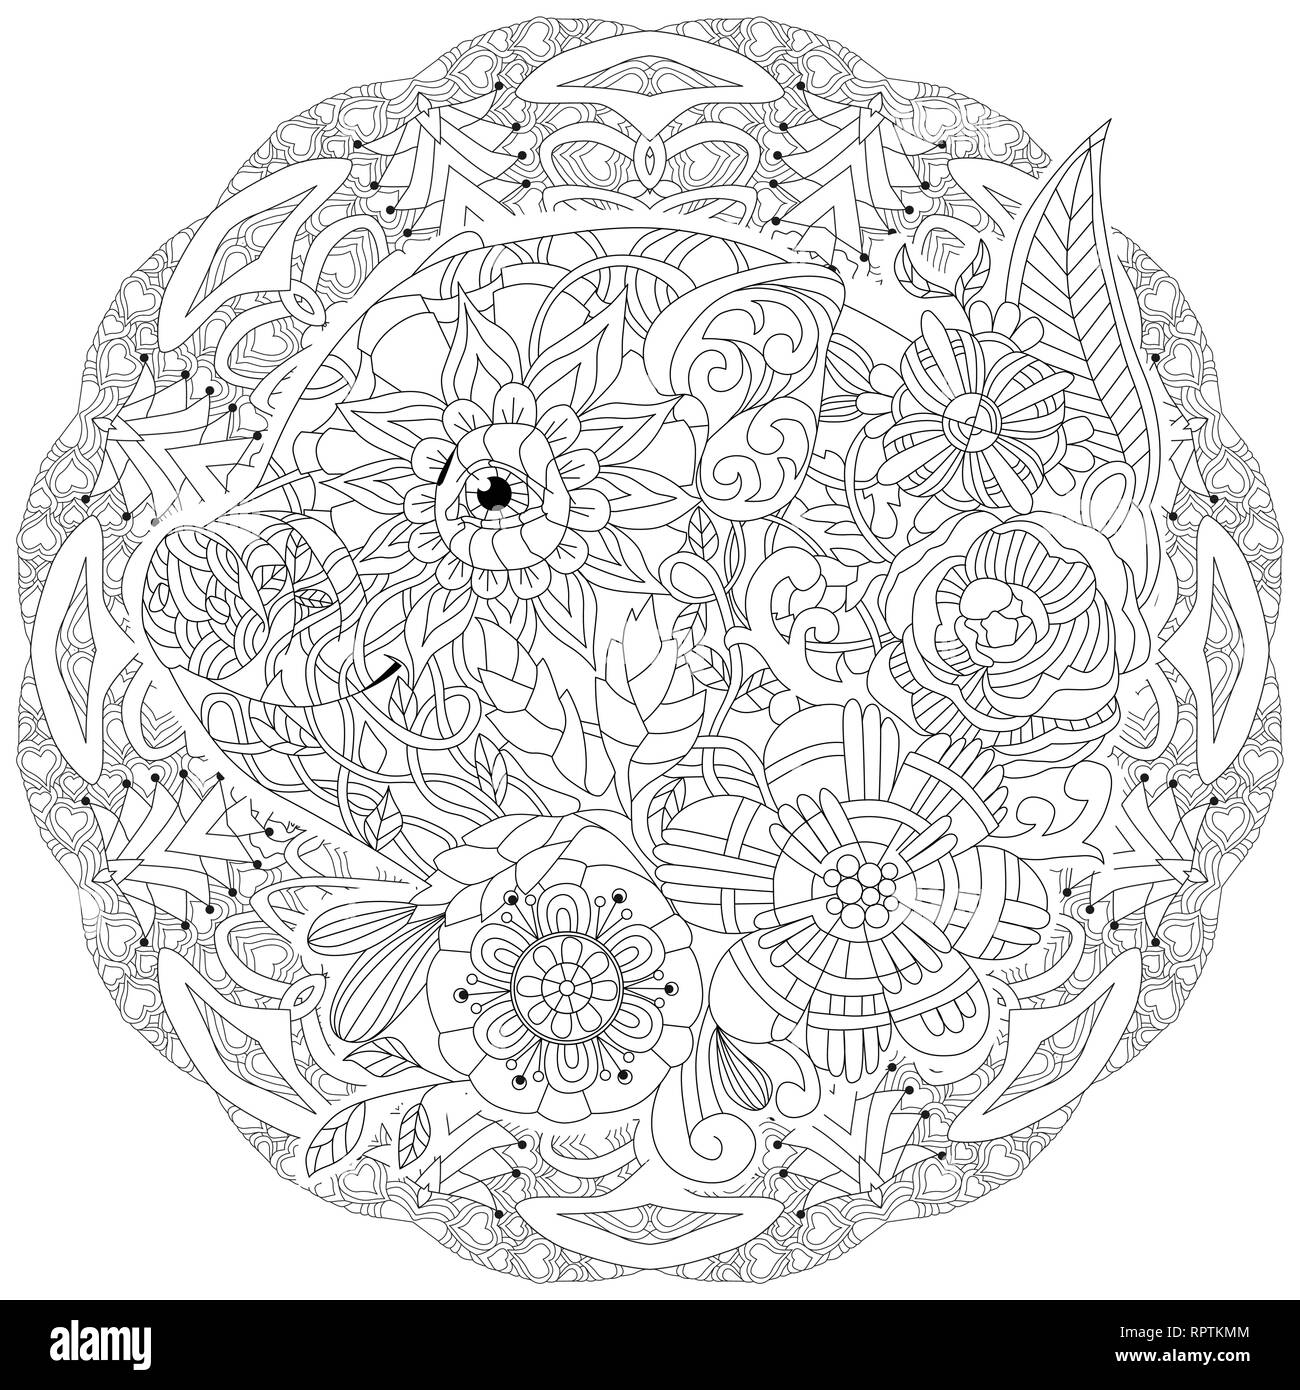 Zentangle illustration pig with mandala. Zentangle or doodle piglet. Coloring book domestic animal. Stock Vector